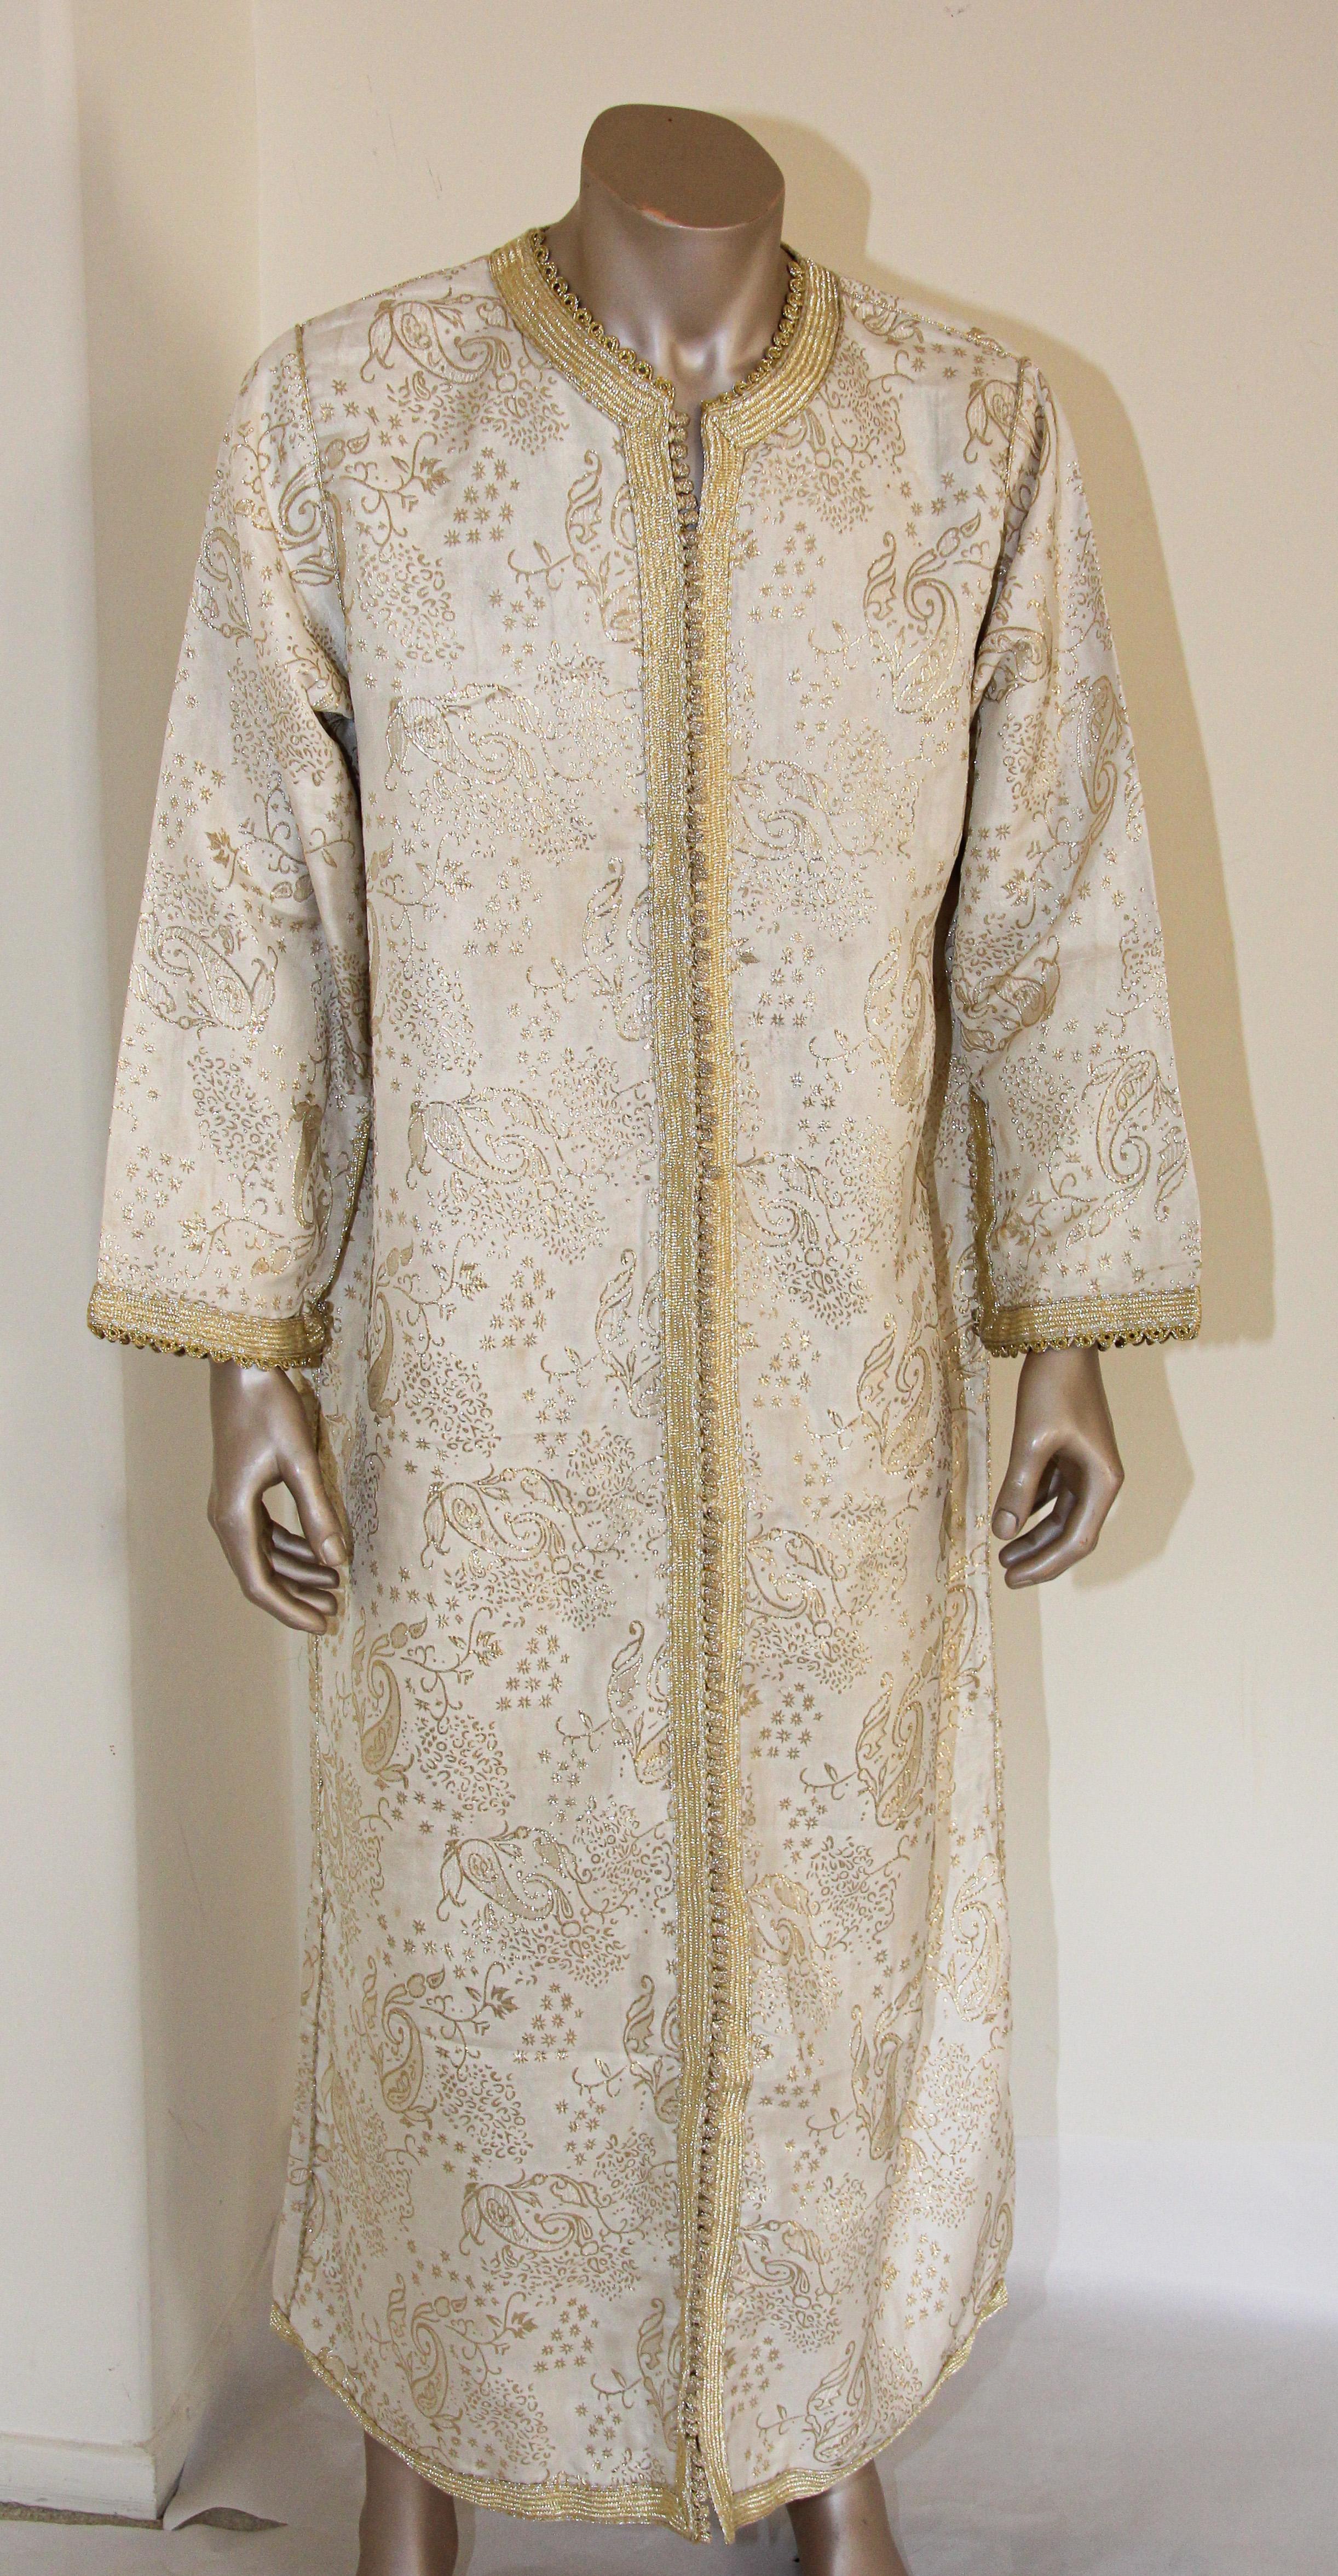 Elegant Moroccan gentleman vintage caftan silver with gold trim.
Moroccan vintage gentleman kaftan silver damask fabric, circa 1970.
One of a kind custom Moroccan Middle Eastern gentleman vintage gown.
This vintage African kaftan features a